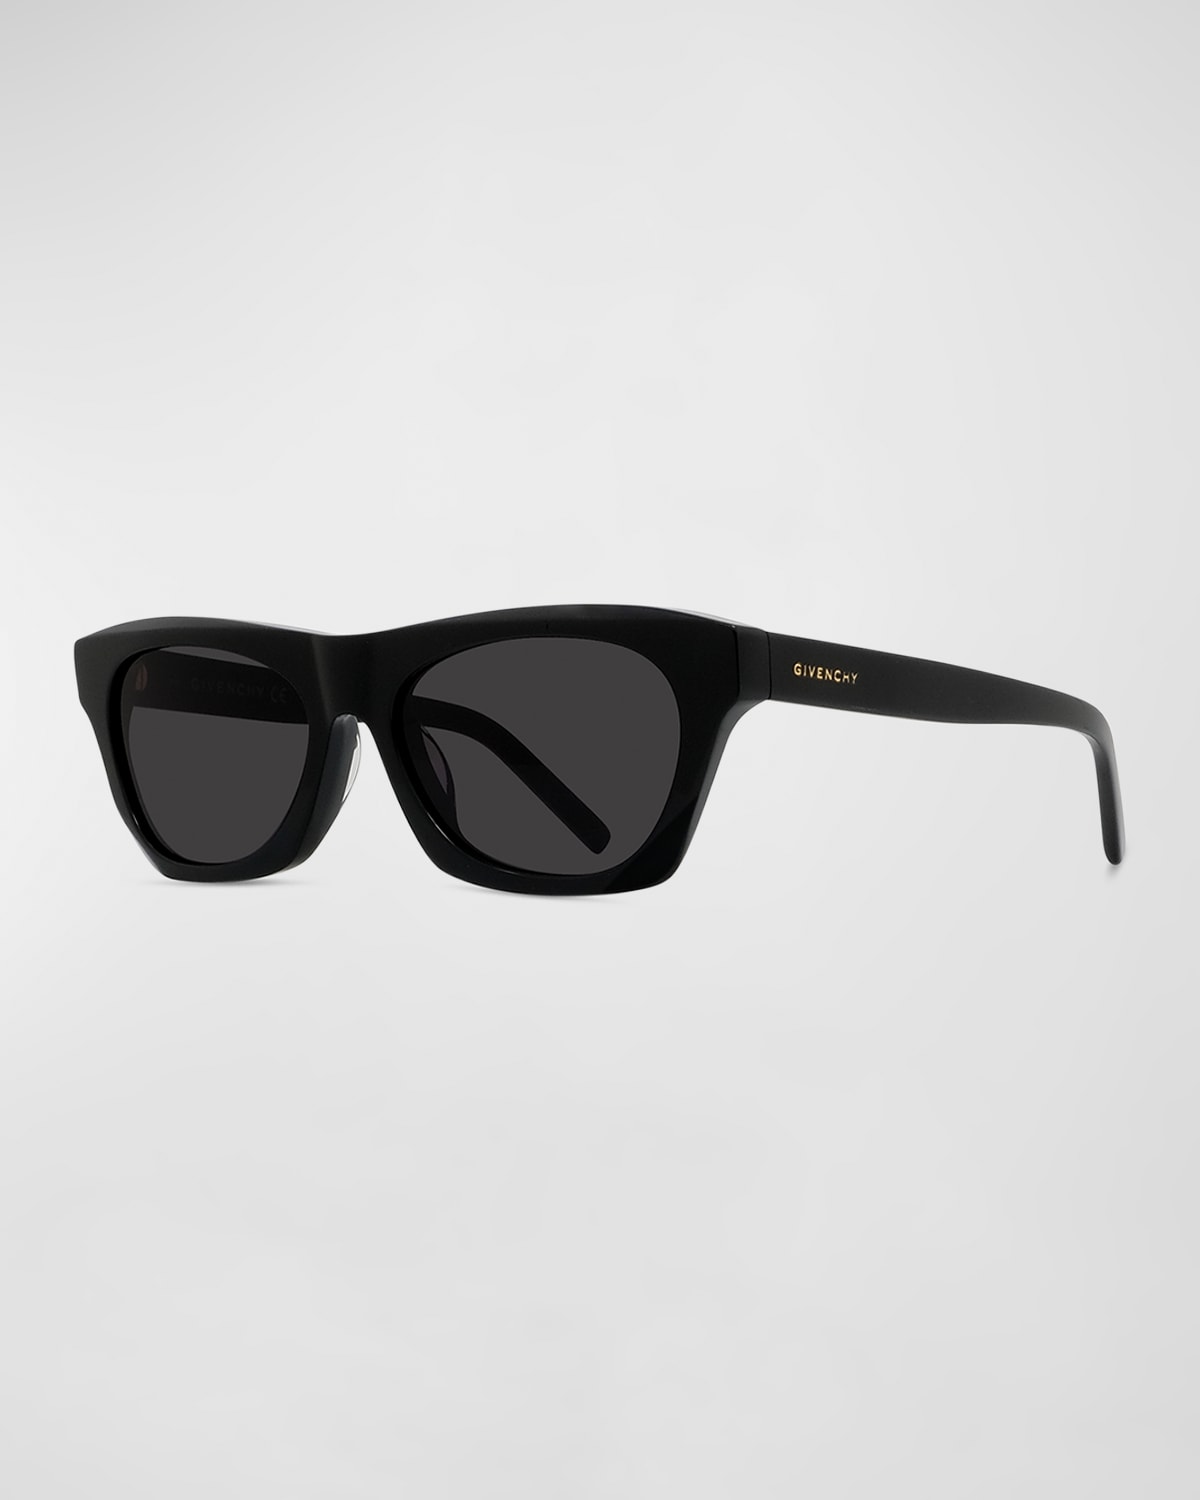 Givenchy 55mm Angled Square Sunglasses In Black/smoke